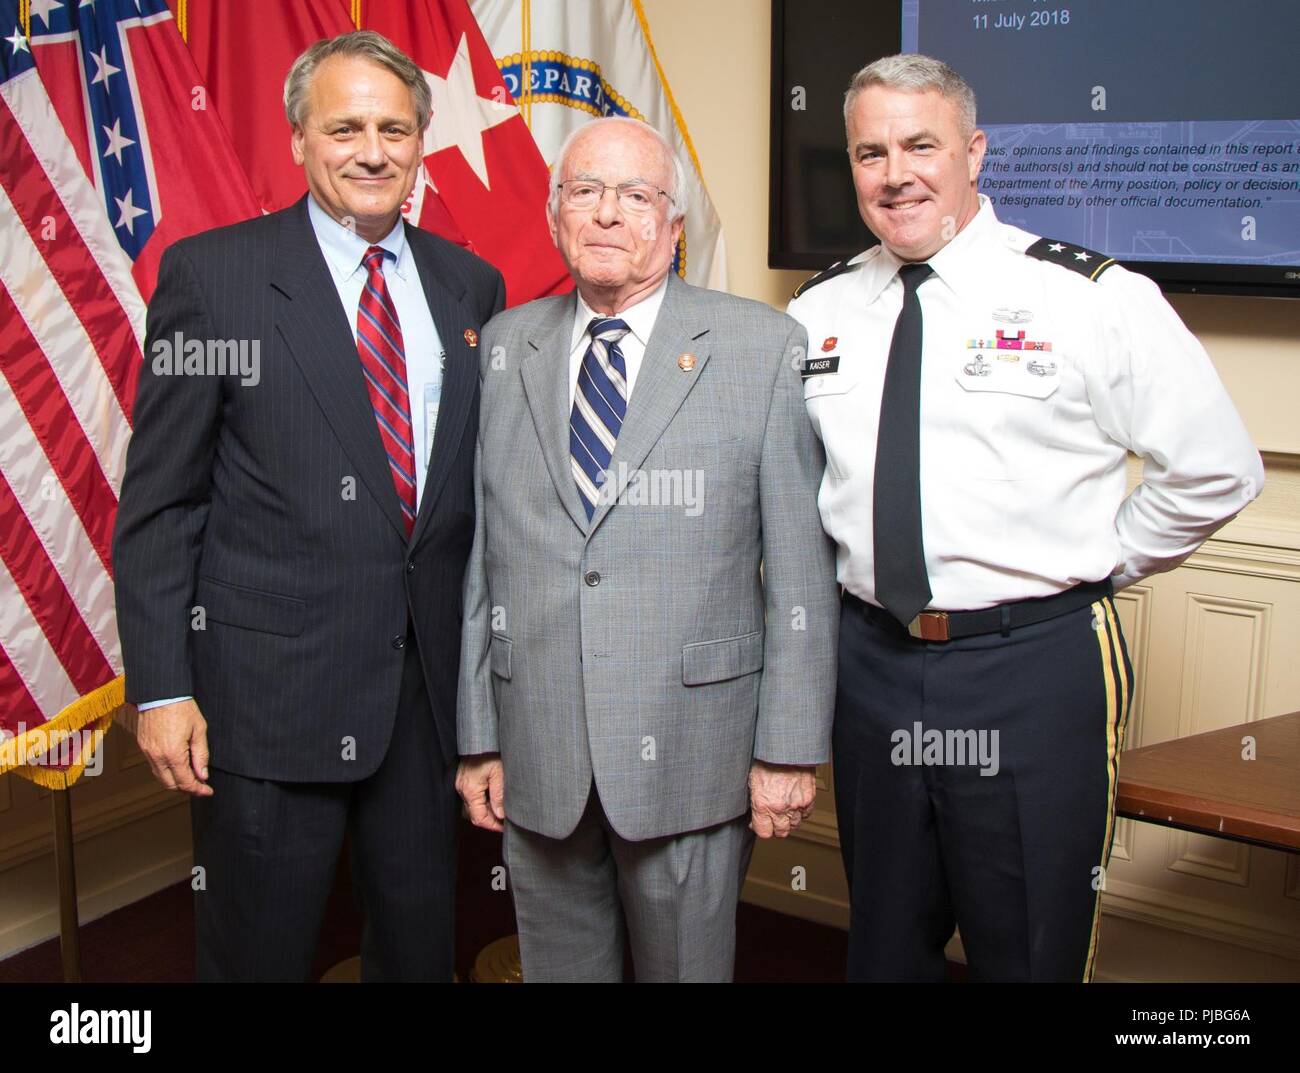 Mississippi River Commission President Maj. Gen. Richard Kaiser and MRC members James A. Reeder and Sam Angel stand in the MRC headquarters in Vicksburg, Miss., July 11, 2018. President Donald Trump appointed Reeder as a member of the Mississippi River Commission May 17, 2018. Commission appointments are nominated by the President of the United States and vetted by the U.S. Senate. (USACE Stock Photo